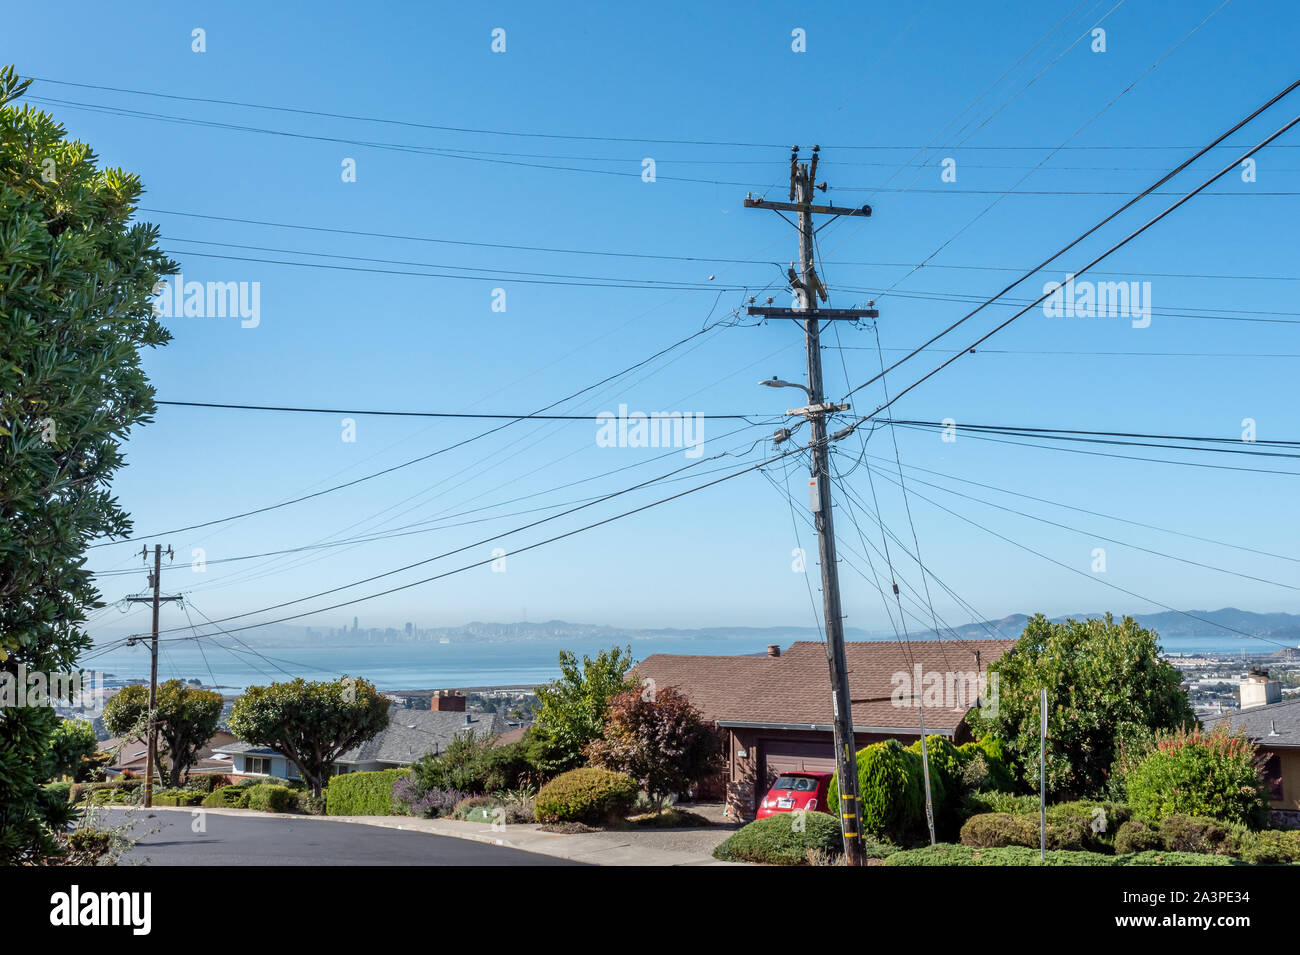 PG&E power lines and cables intersect at a power pole in an El Cerrito, California, neighborhood. San Francsico Bay and downtown are in the distance. Stock Photo